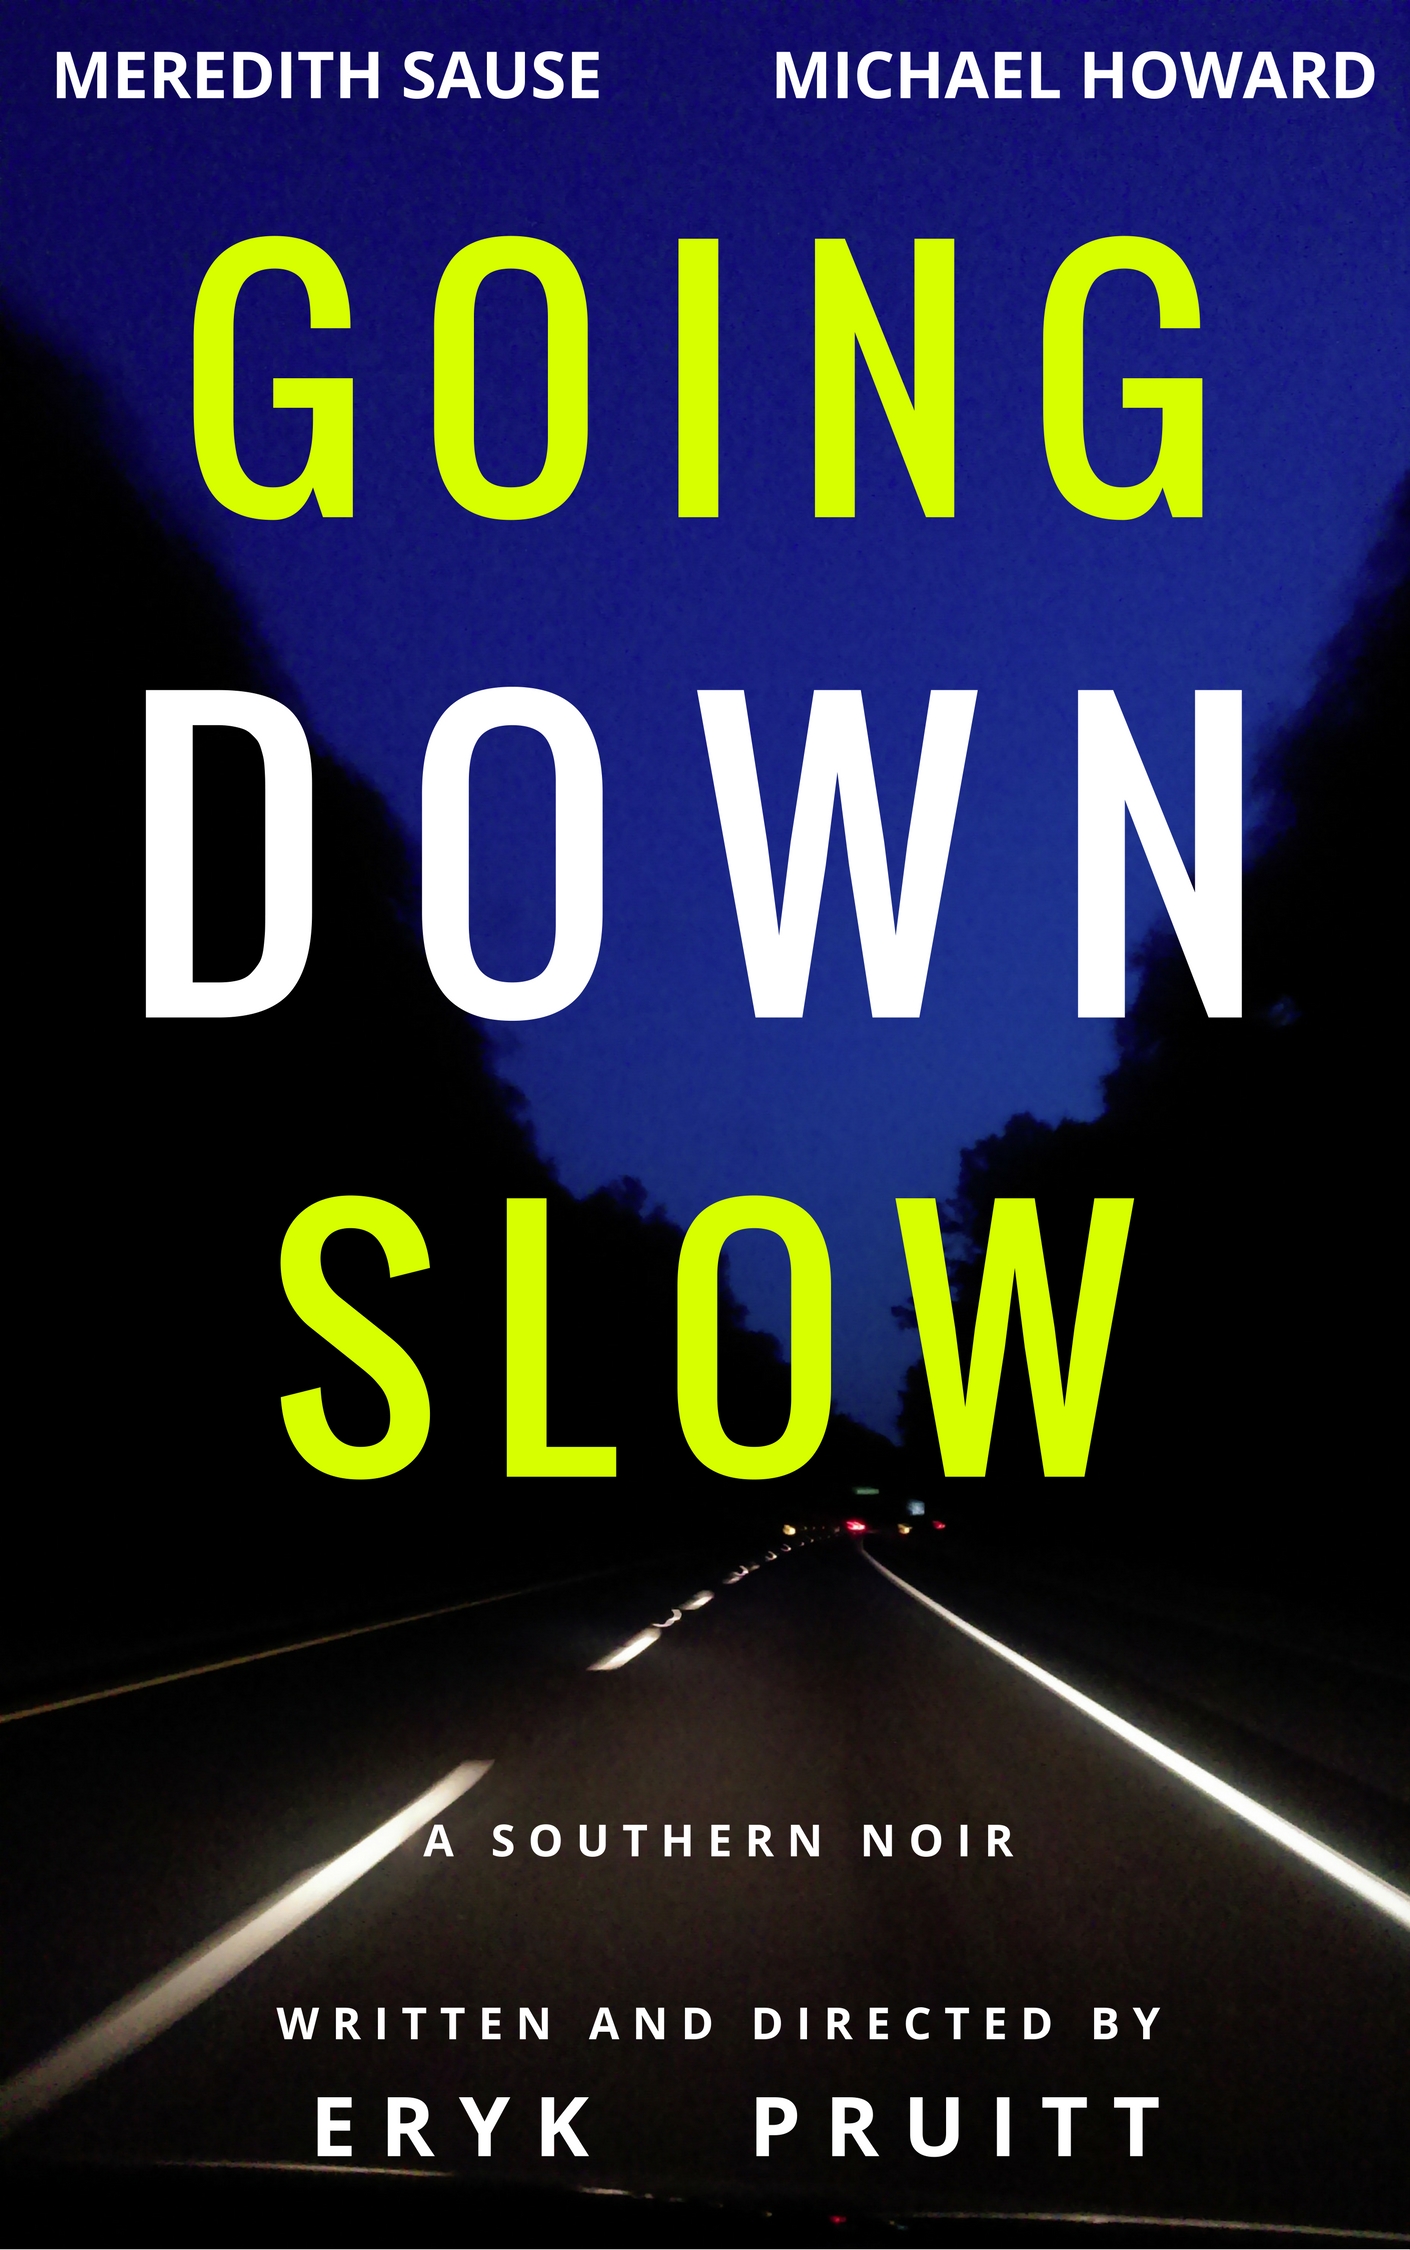 Going Down Slow, a short film